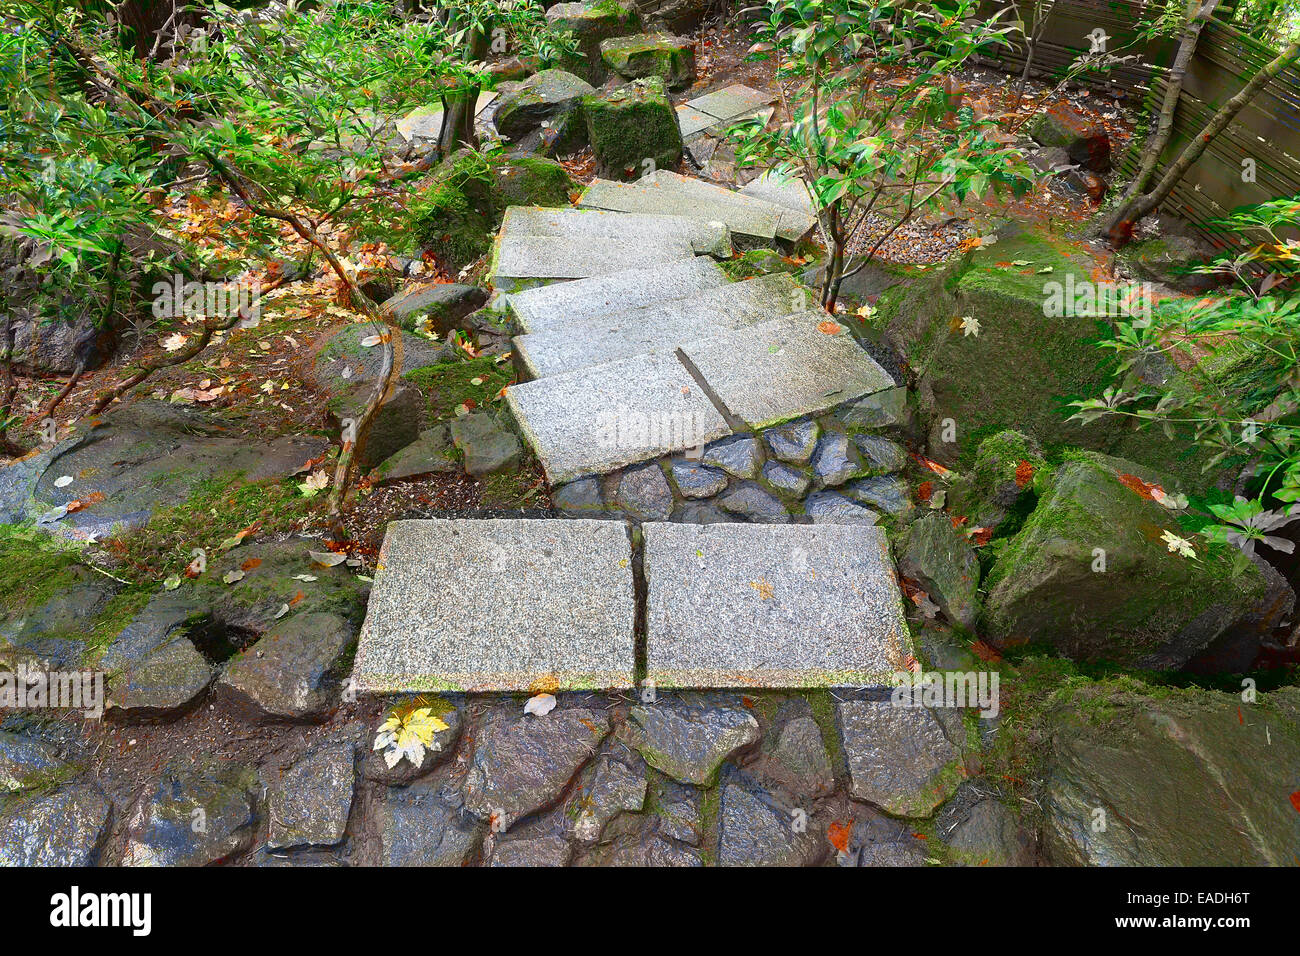 Stone Stair Steps at Portland Japanese Garden in Fall Season Stock Photo